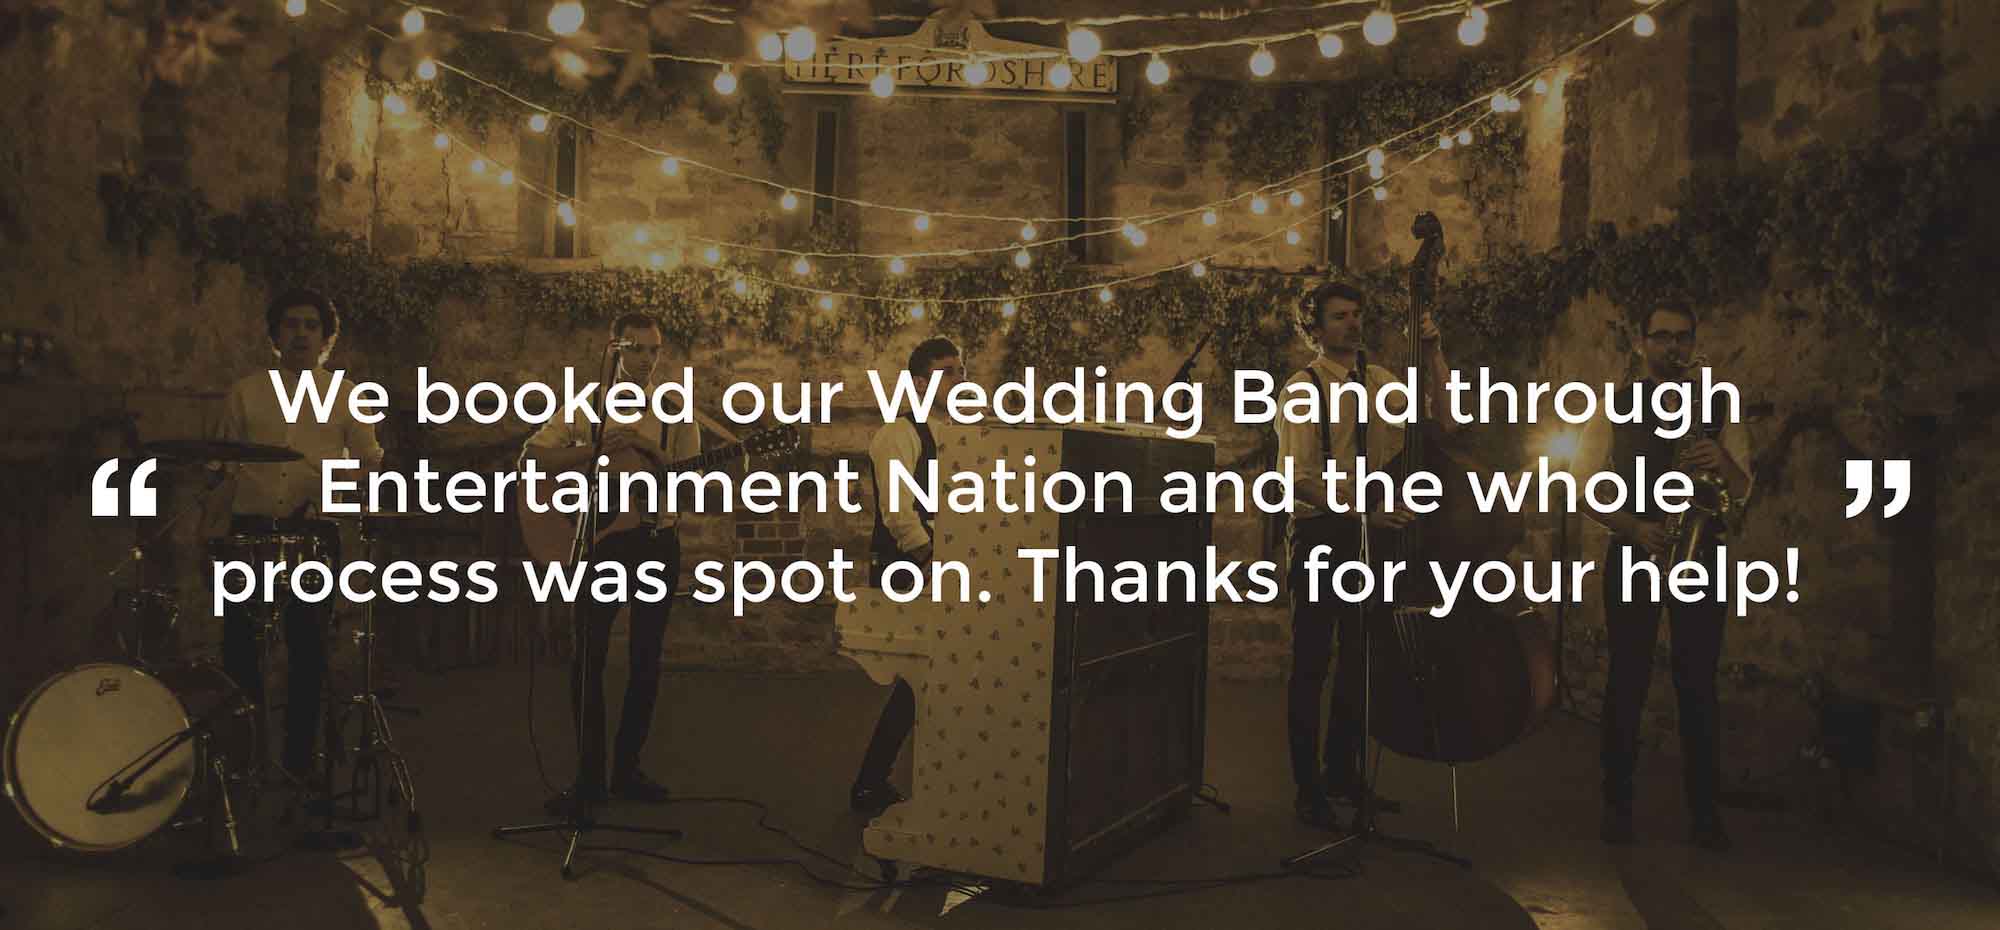 Client Review of a Wedding Band Cheshire